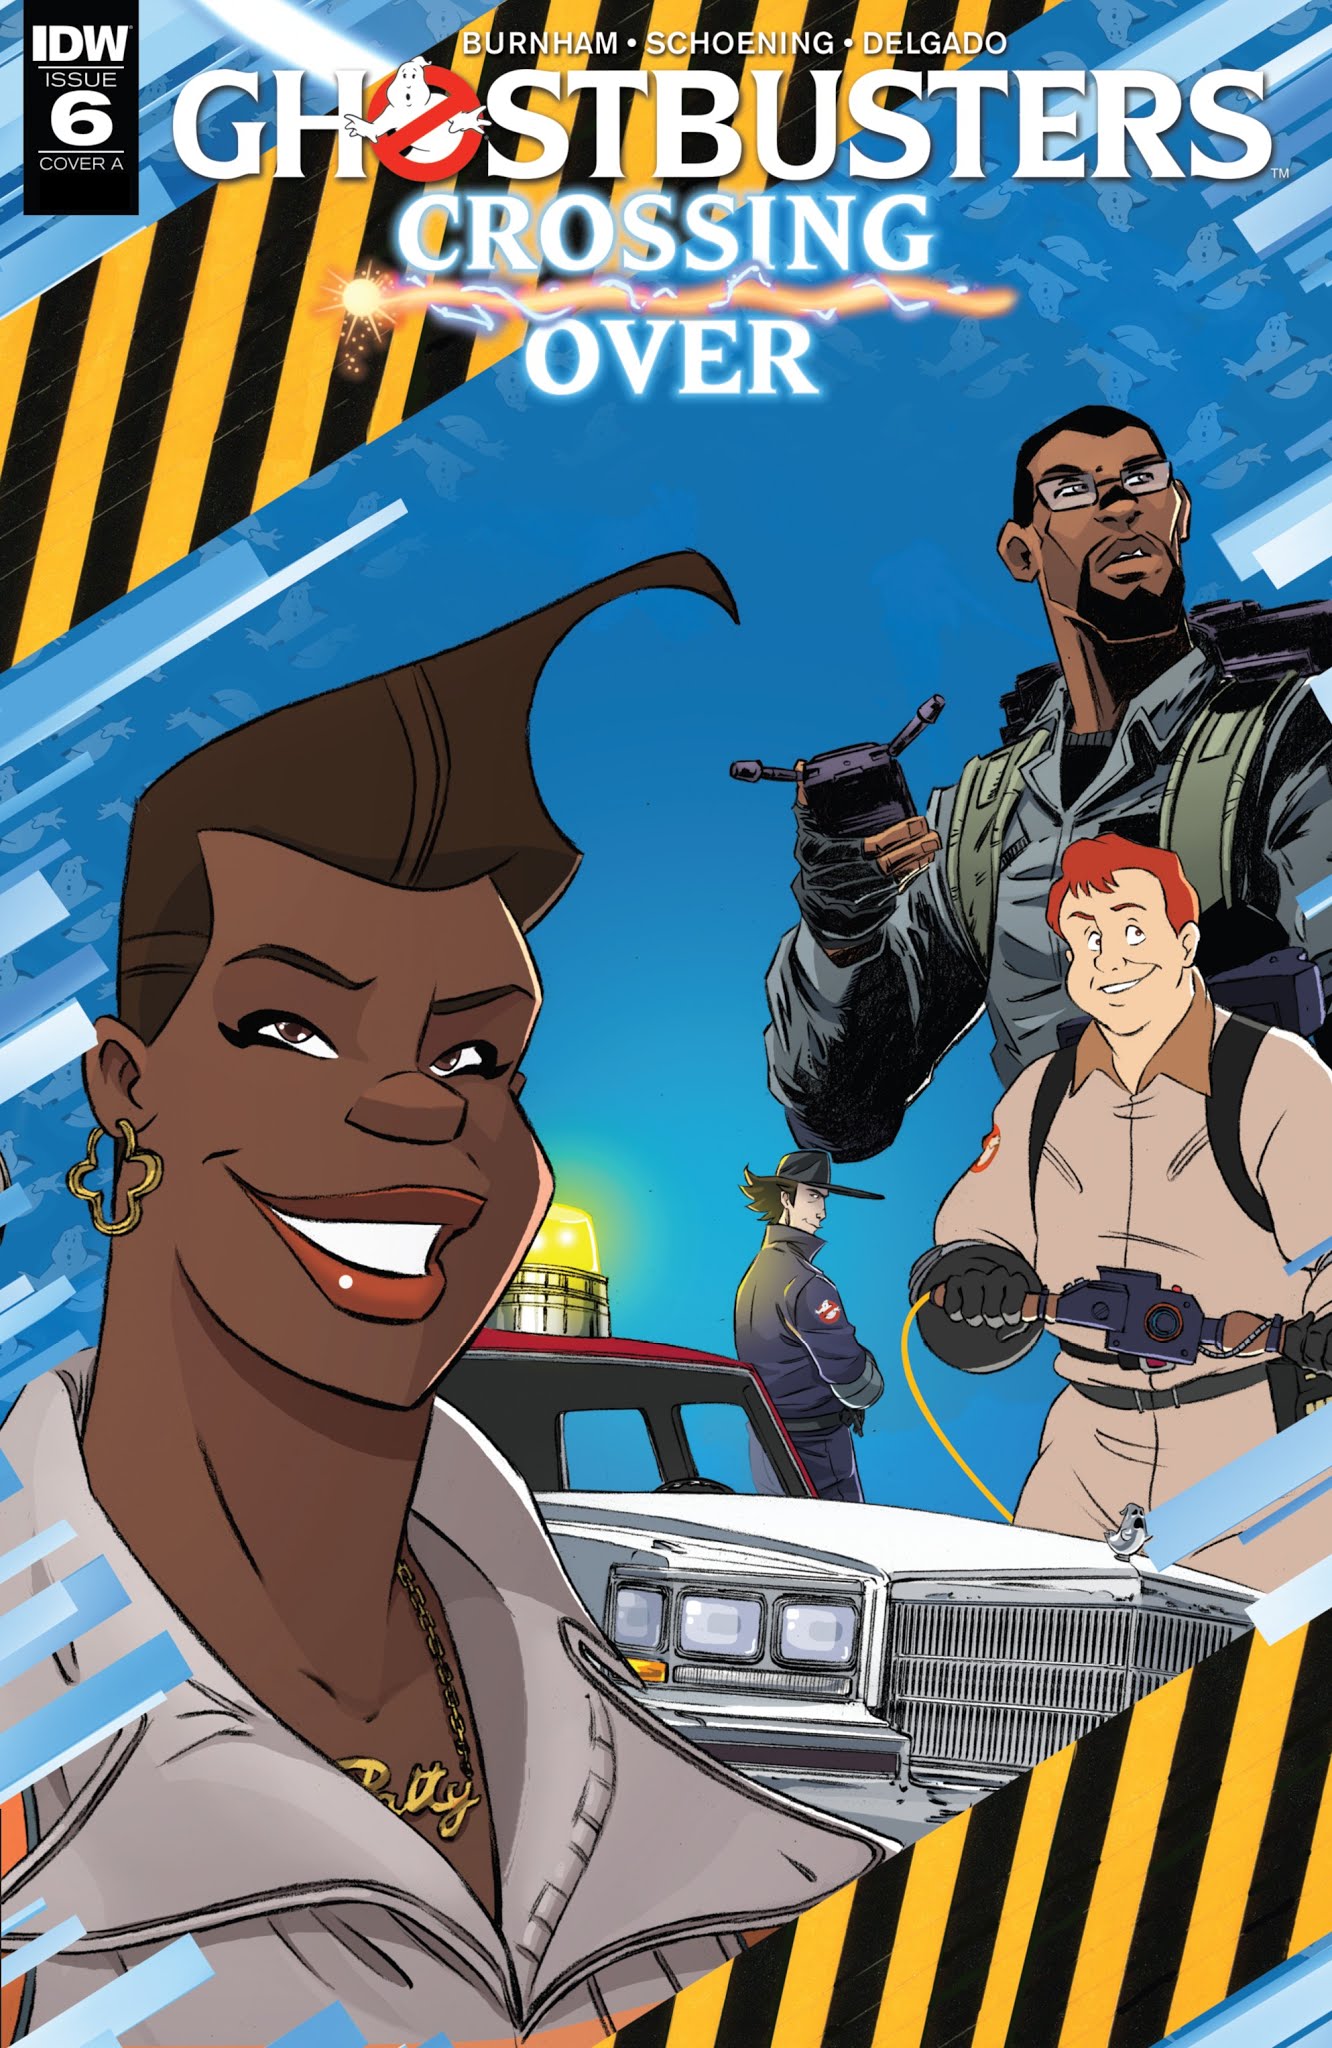 Read online Ghostbusters: Crossing Over comic -  Issue #6 - 1